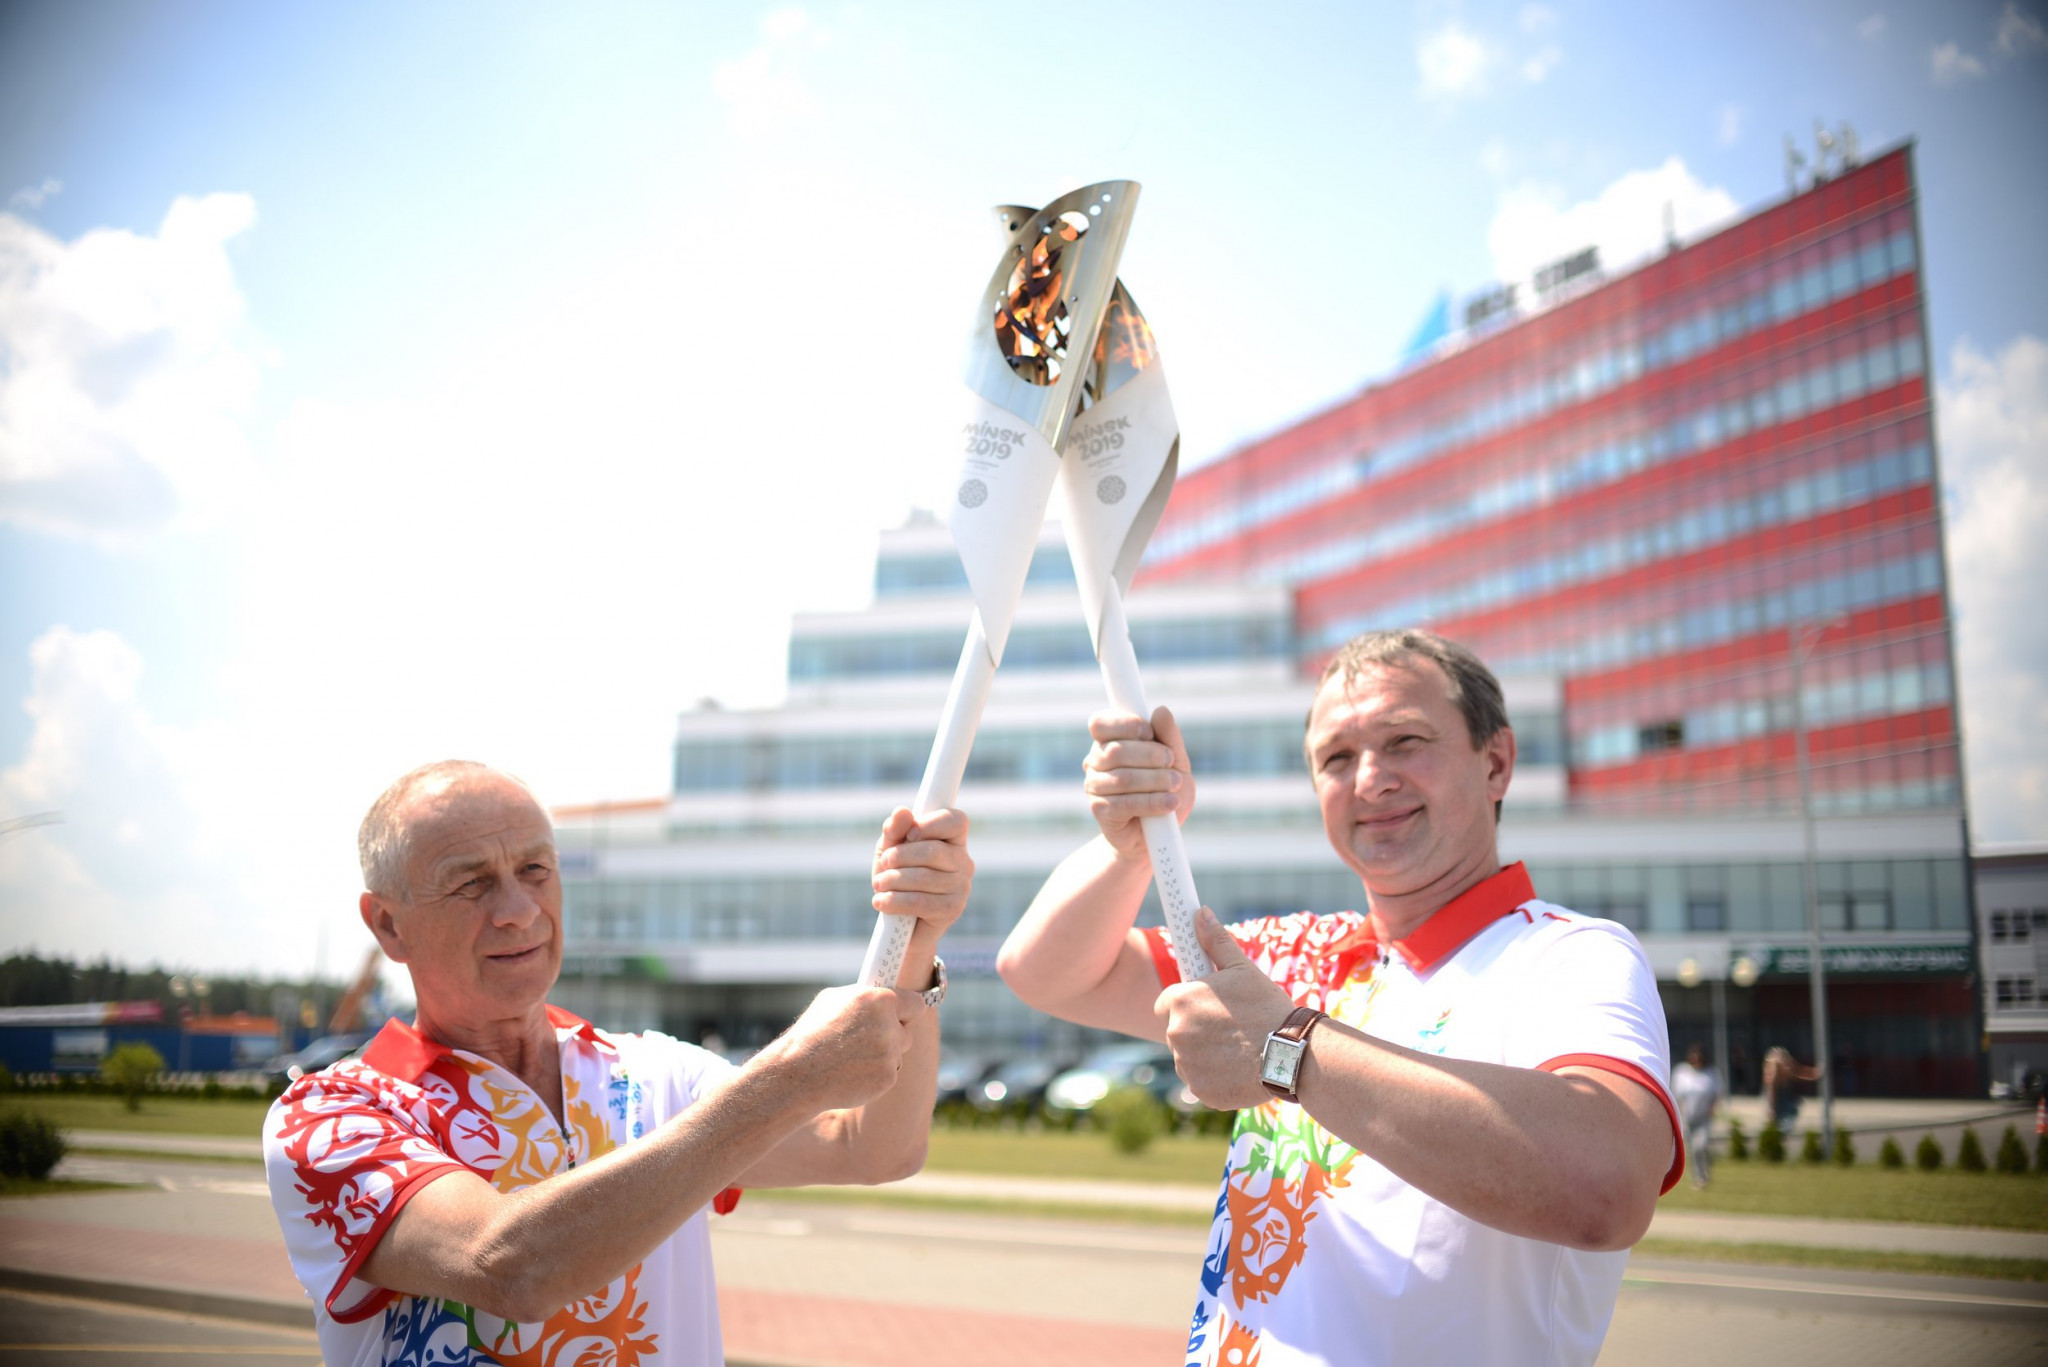 The European Games Torch, which was lit in Rome, has been carried by a variety of figures in sport and beyond ©Minsk 2019